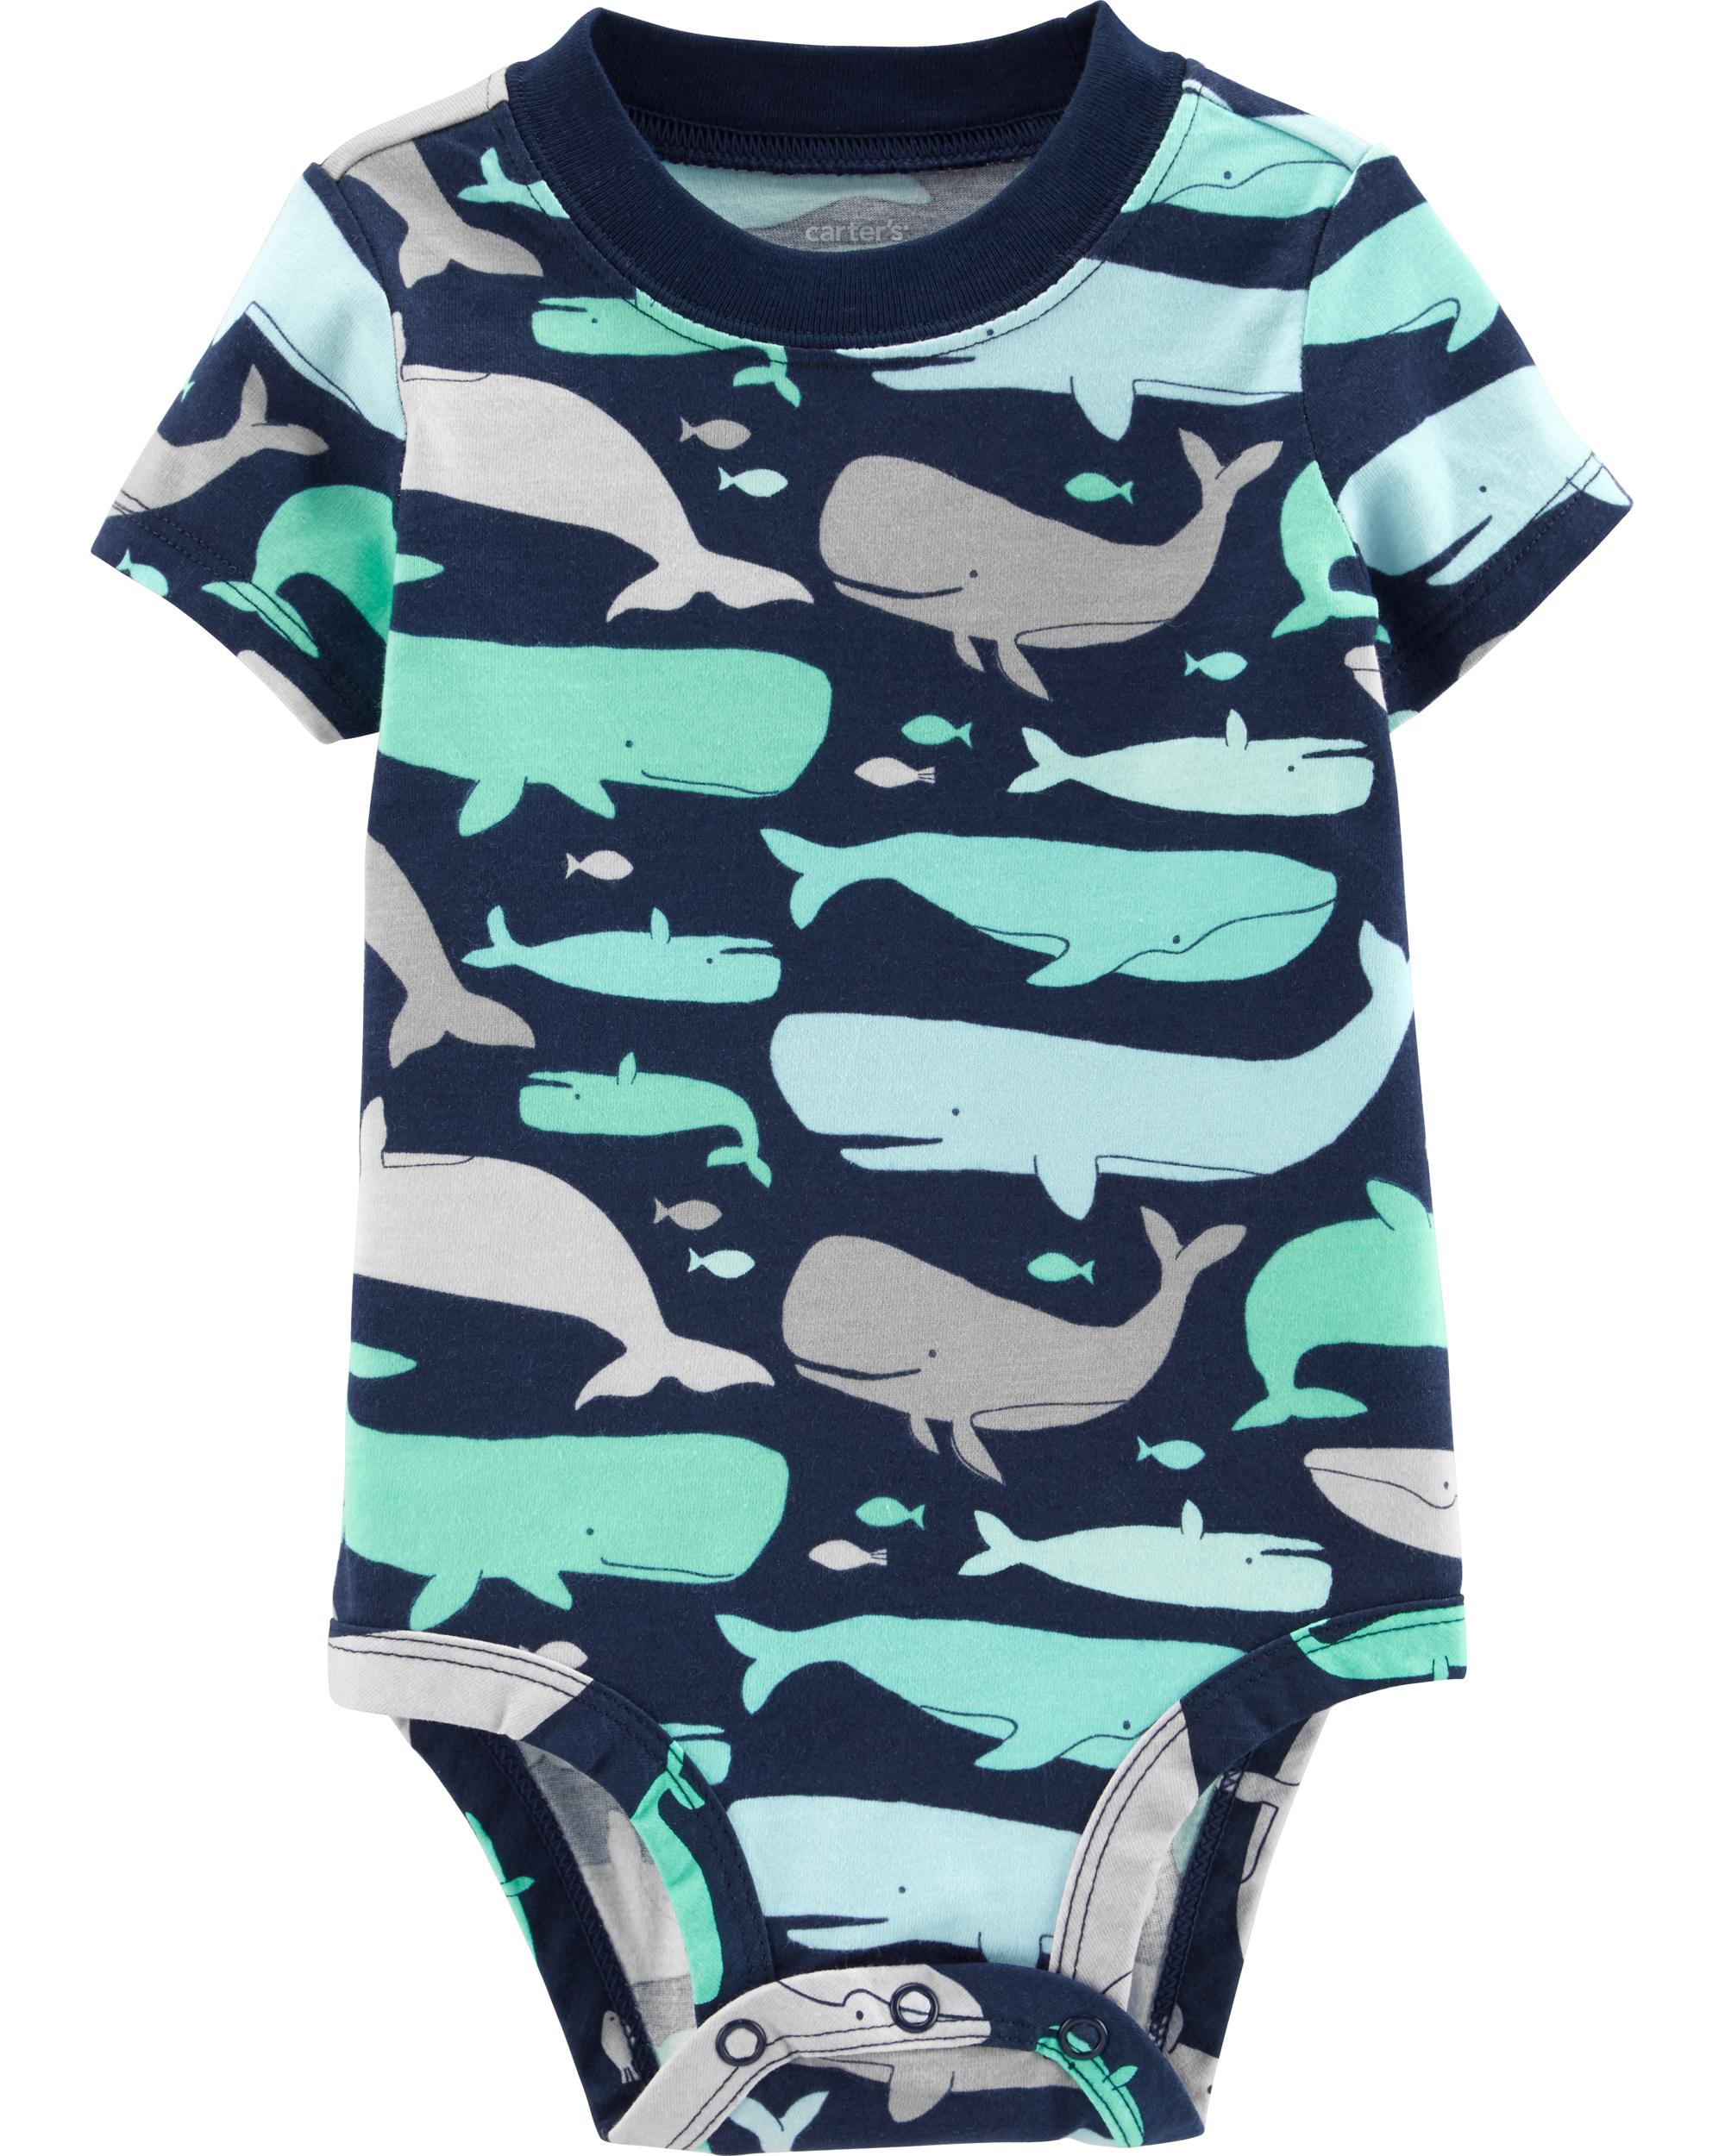 Whale Collectible Bodysuit | carters.com